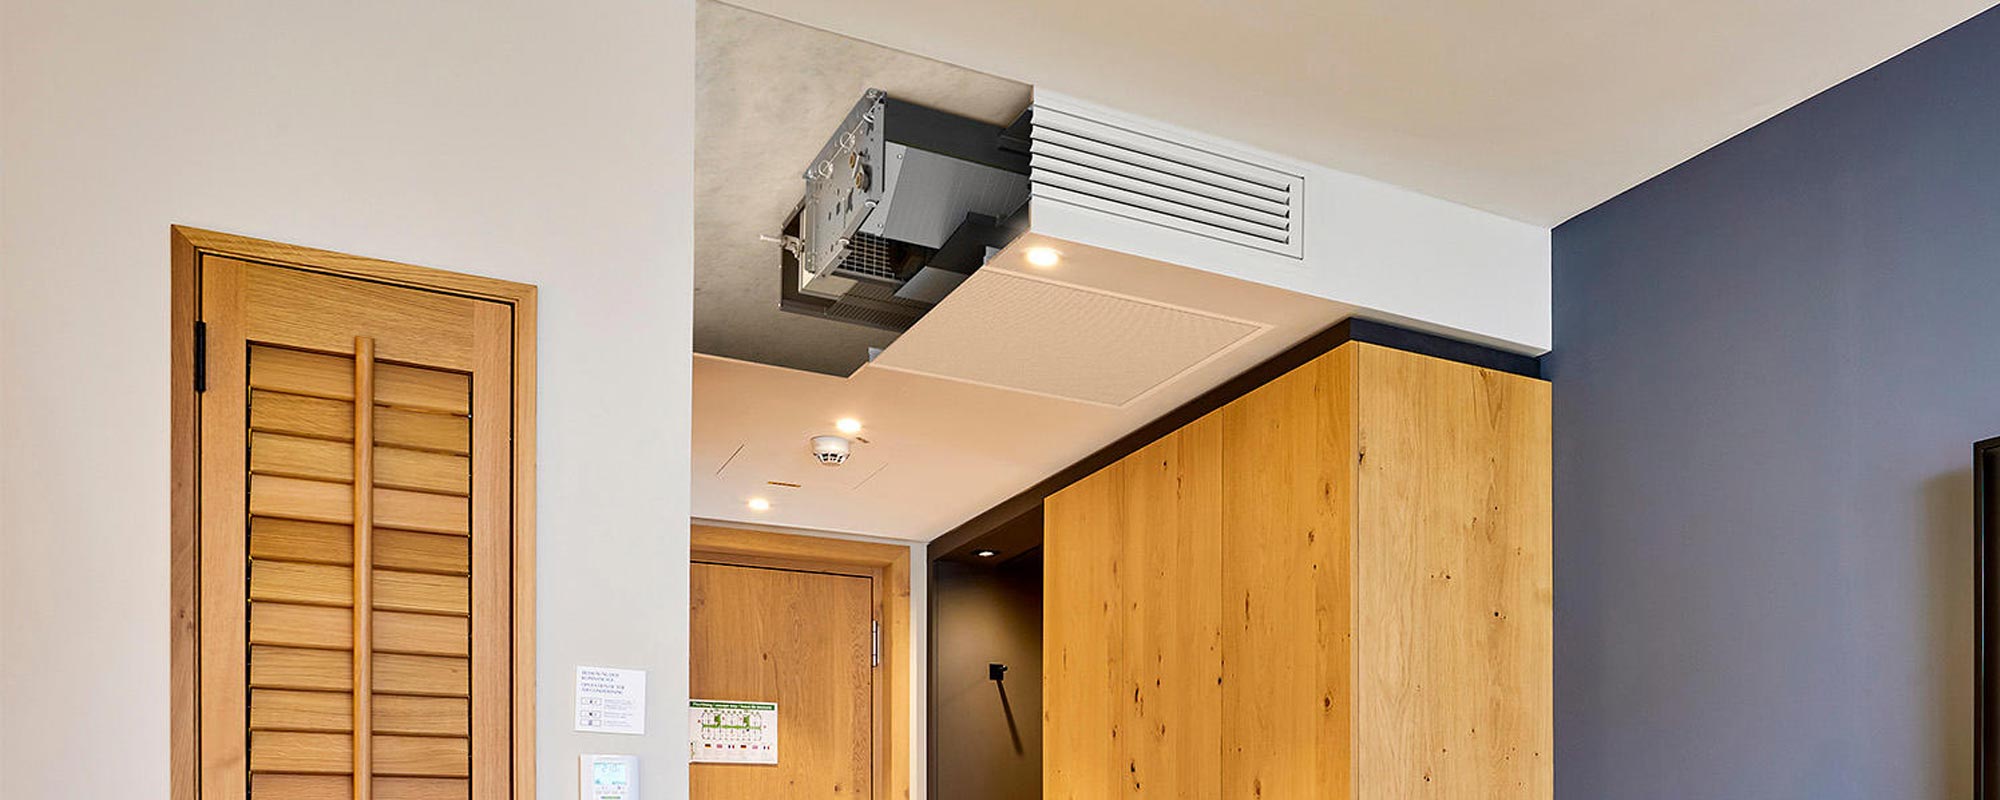 Heating and Air-Conditioning in Apartments and Condos with a